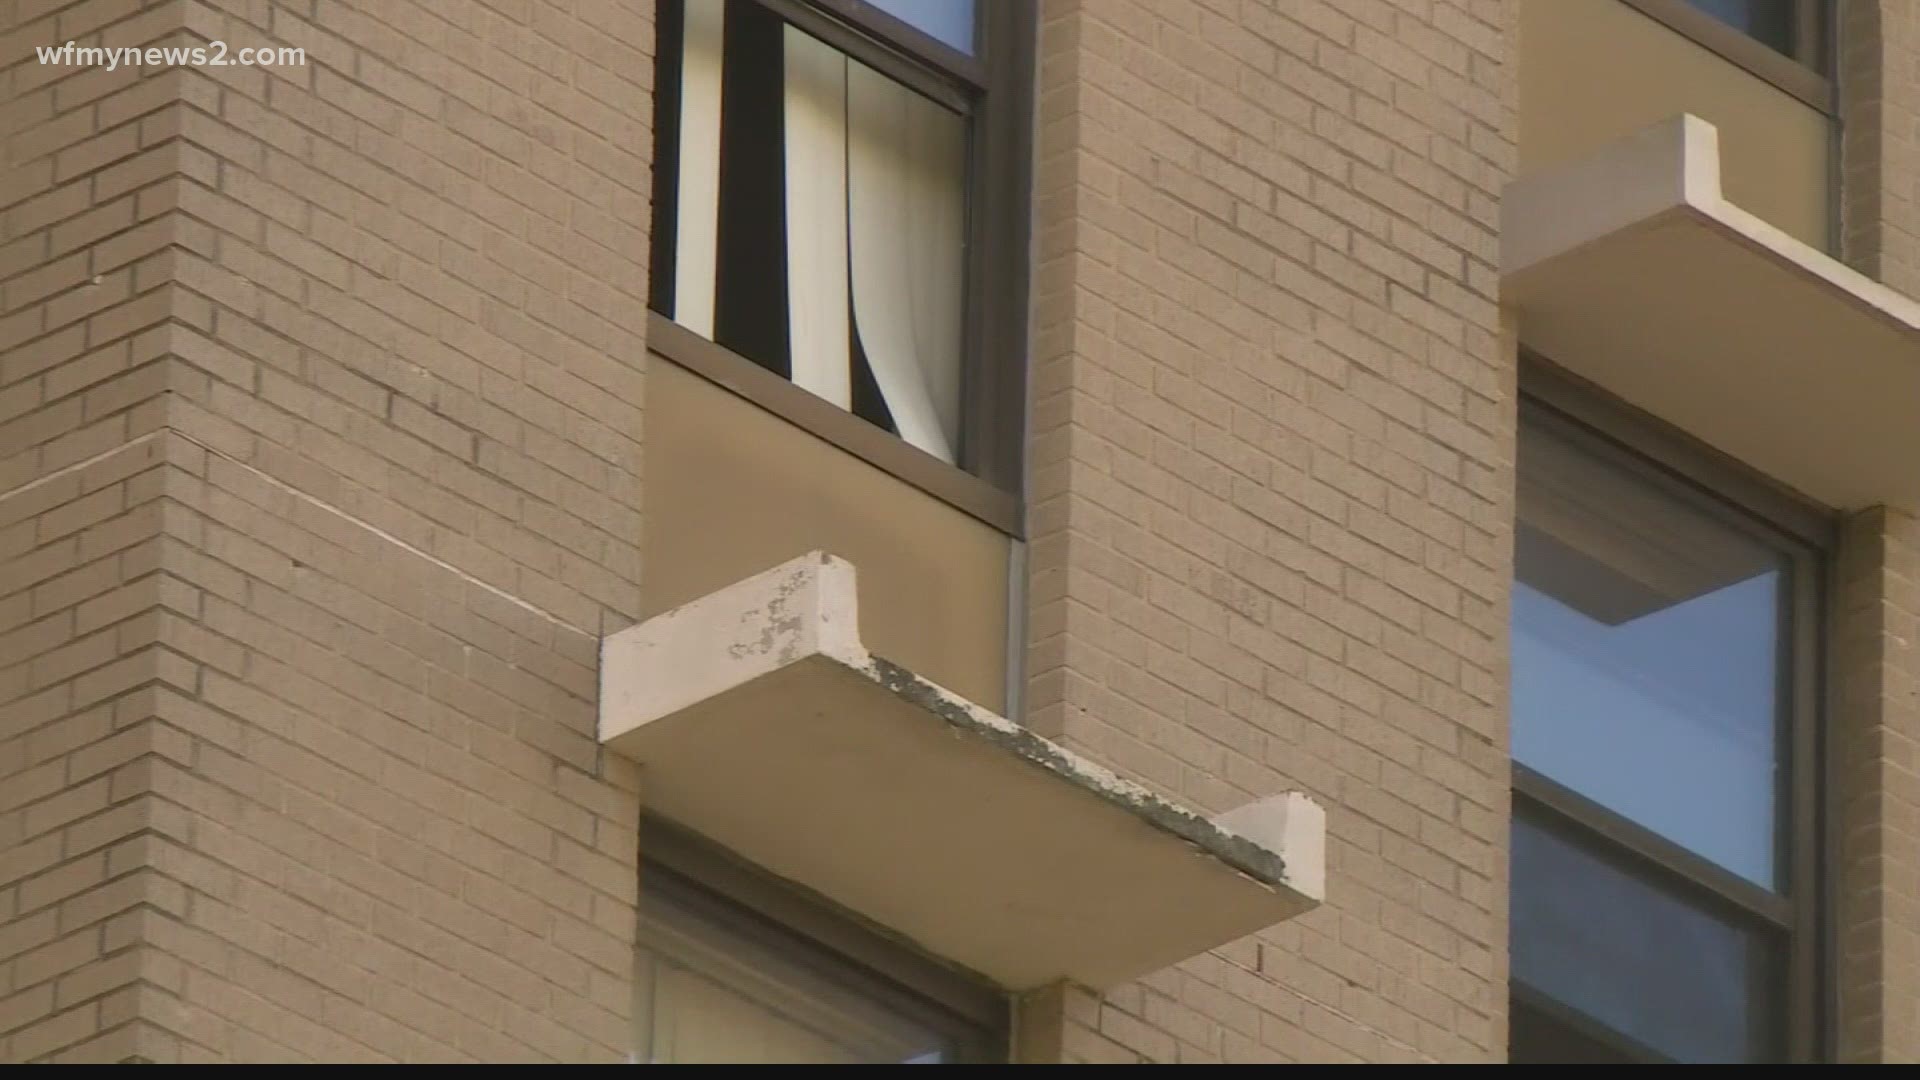 The Red Cross is helping several families displaced by a fire at Astor Dowdy Towers.